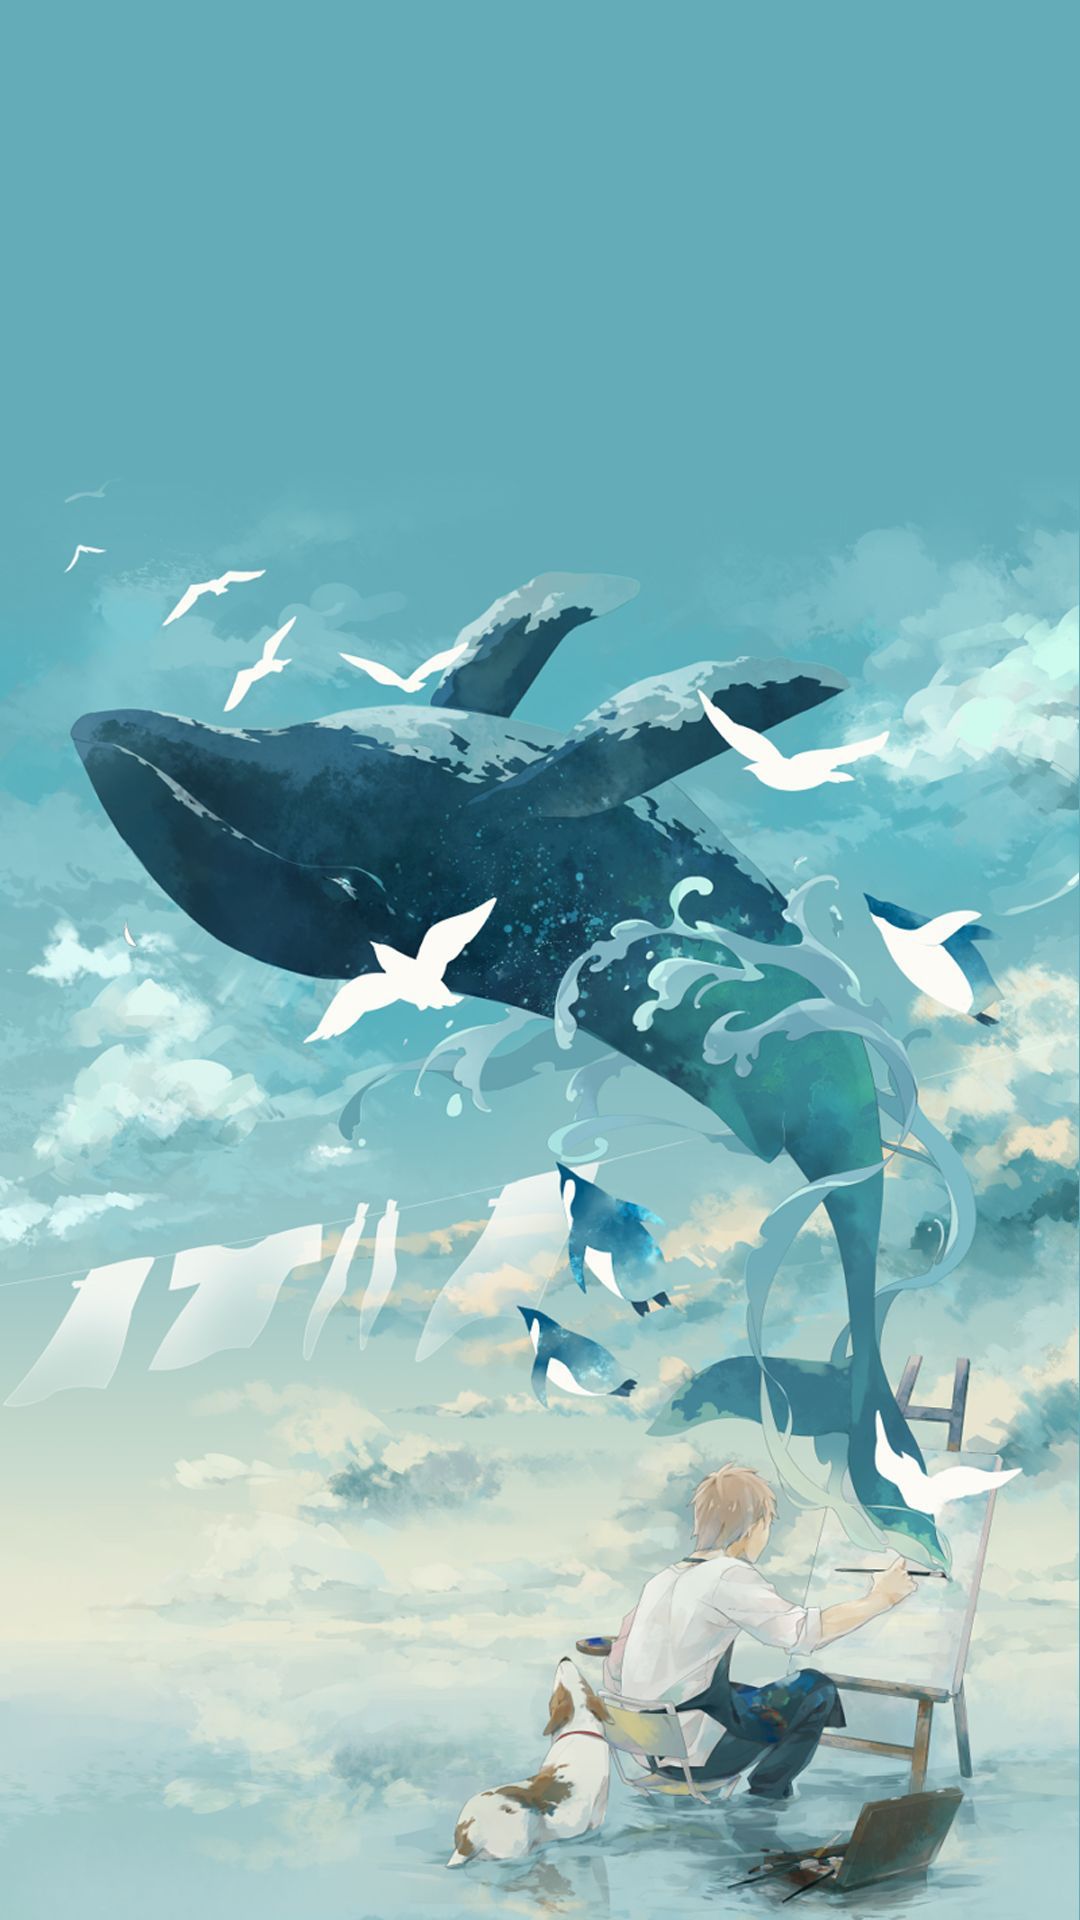 Whale and drawing boy wallpaper. Anime scenery wallpaper, Fantasy art landscapes, Anime scenery